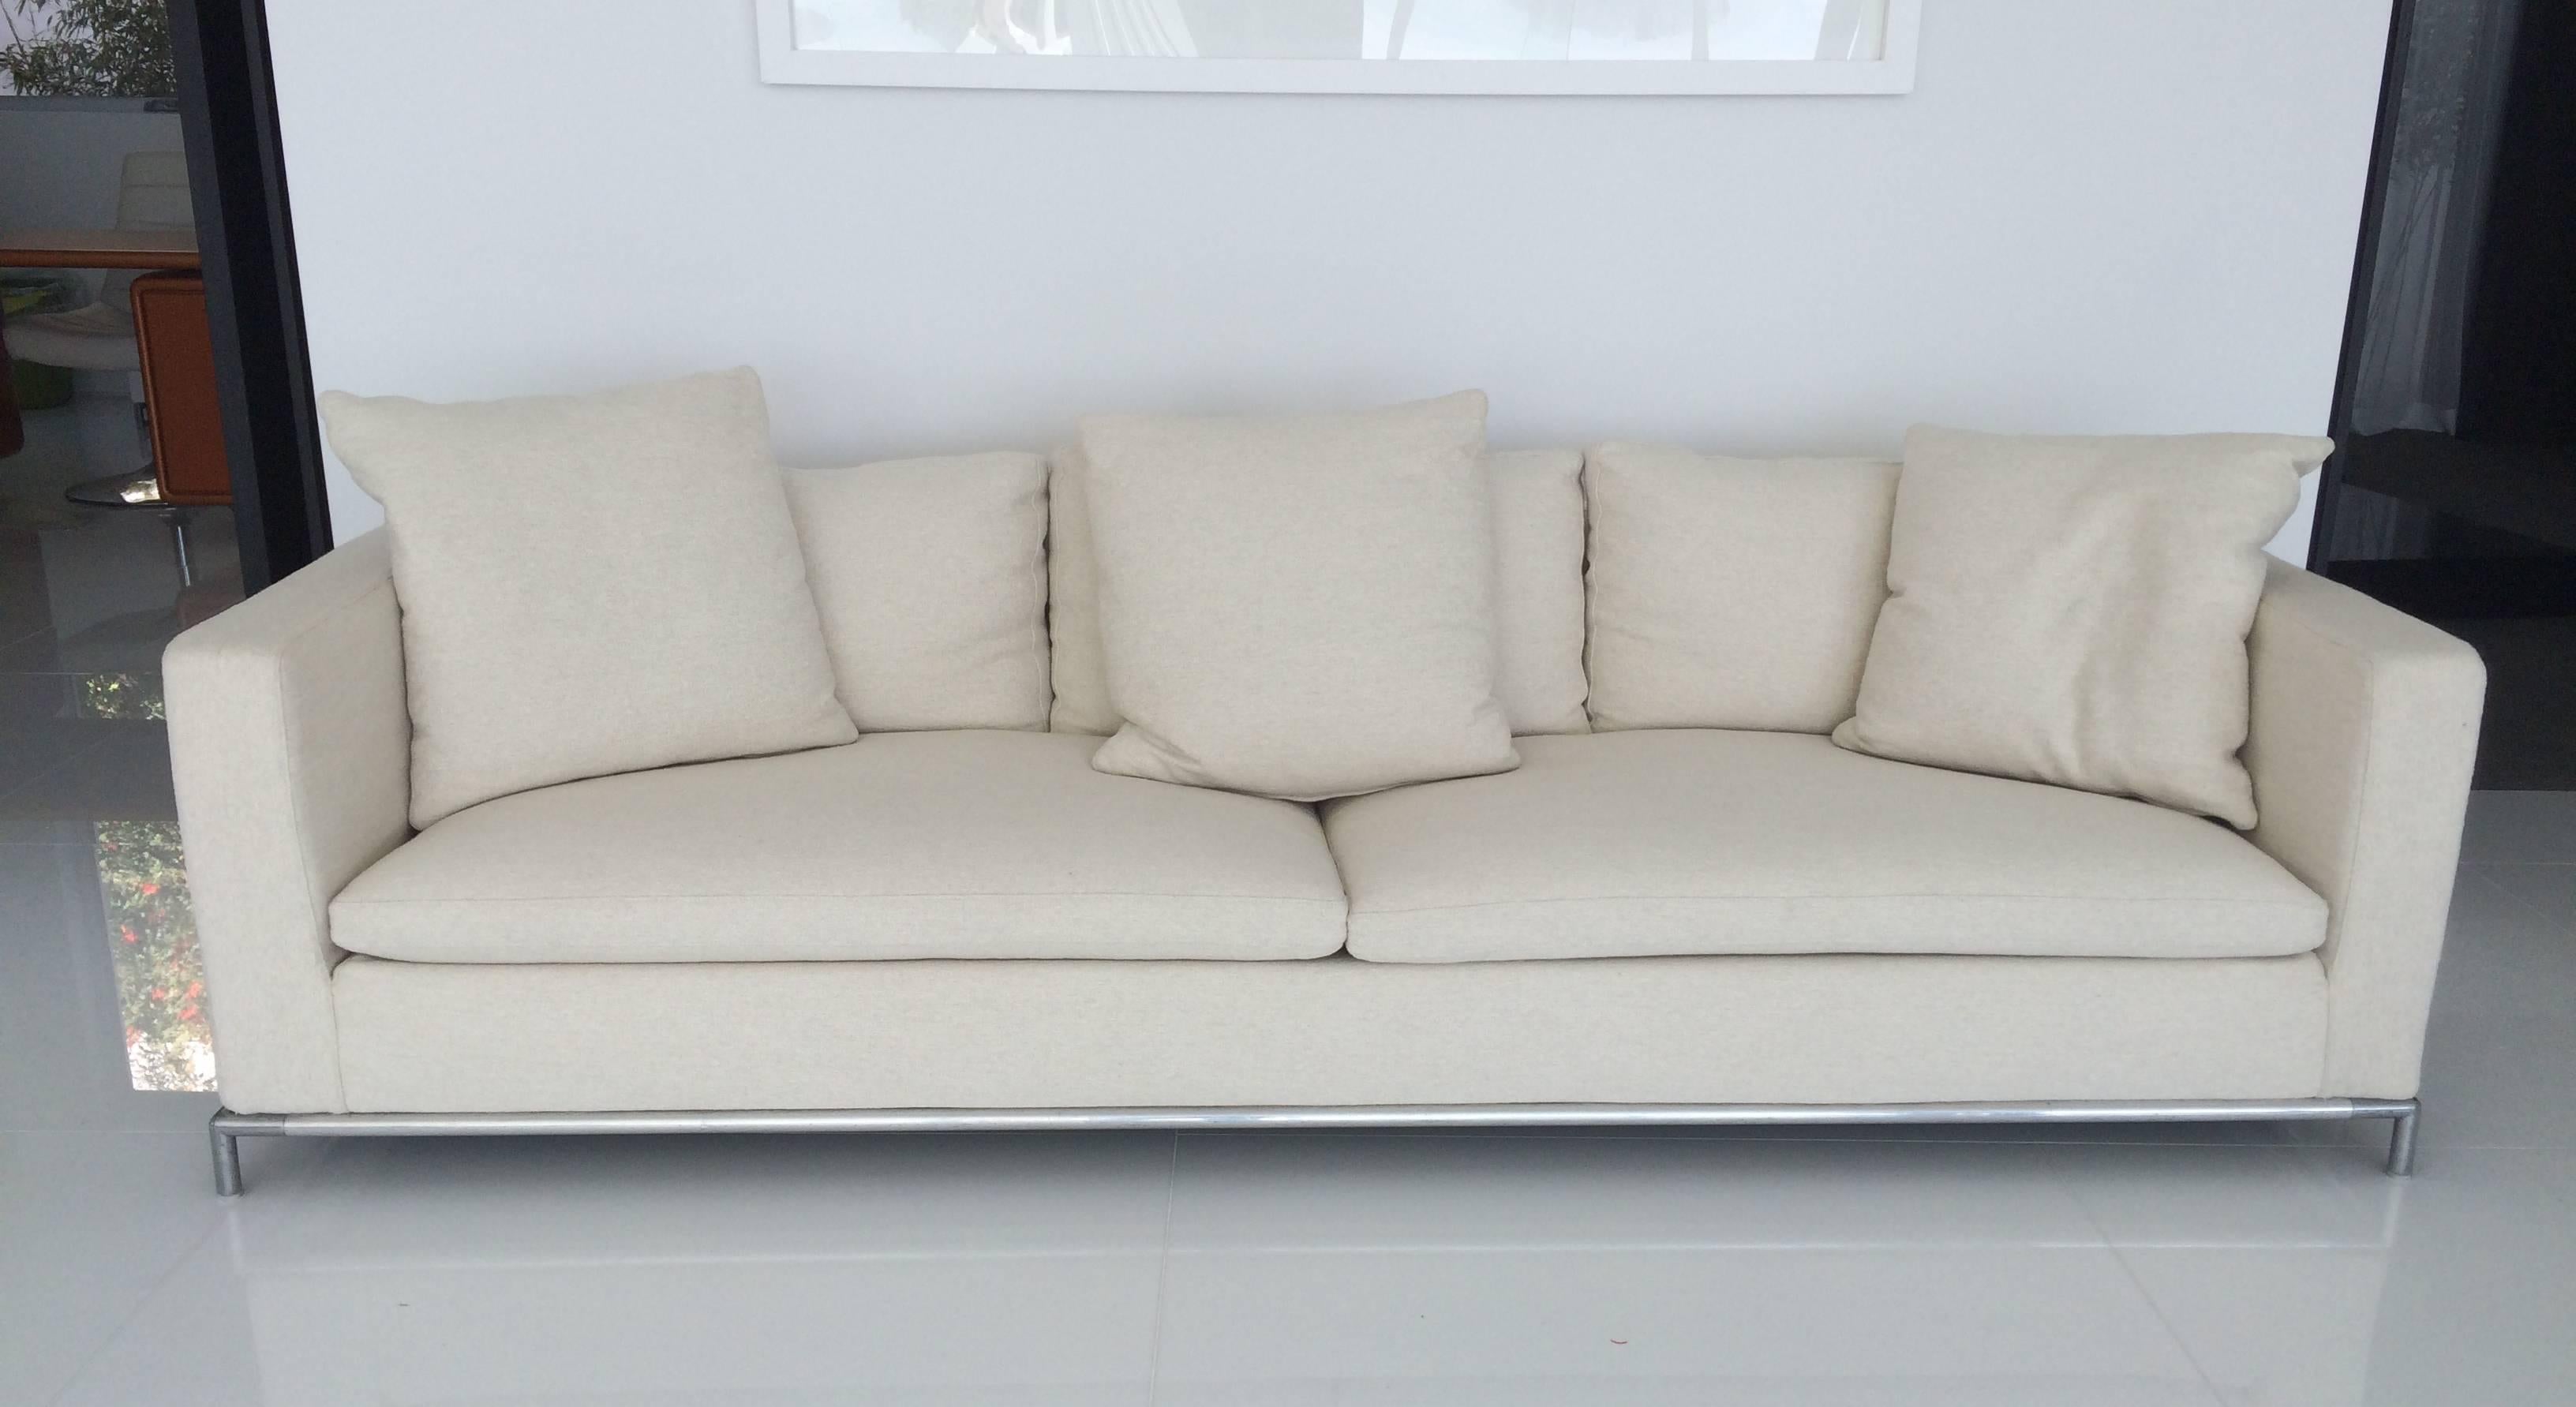 Beautiful and contemporary George sofa designed by Antonio Citterio in 2001 and manufactured by B&B Italia, originally purchased through Diva in Robertson Blvd, Los Angeles.
The sofa is in excellent condition, clean and ready to be